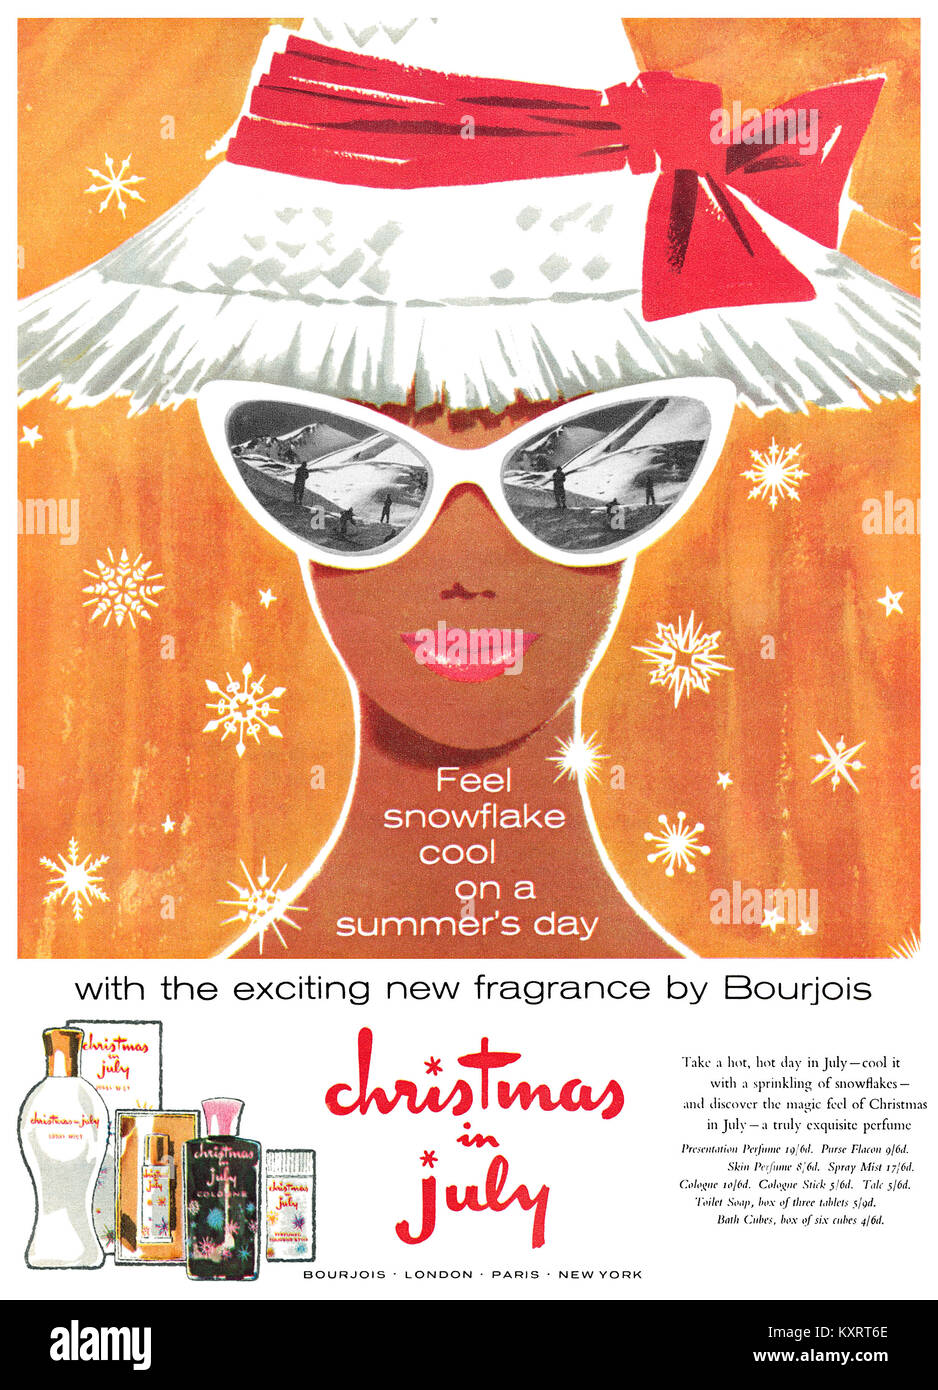 1960 British advertisement for Christmas In July perfume and toiletries by Bourjois. Stock Photo